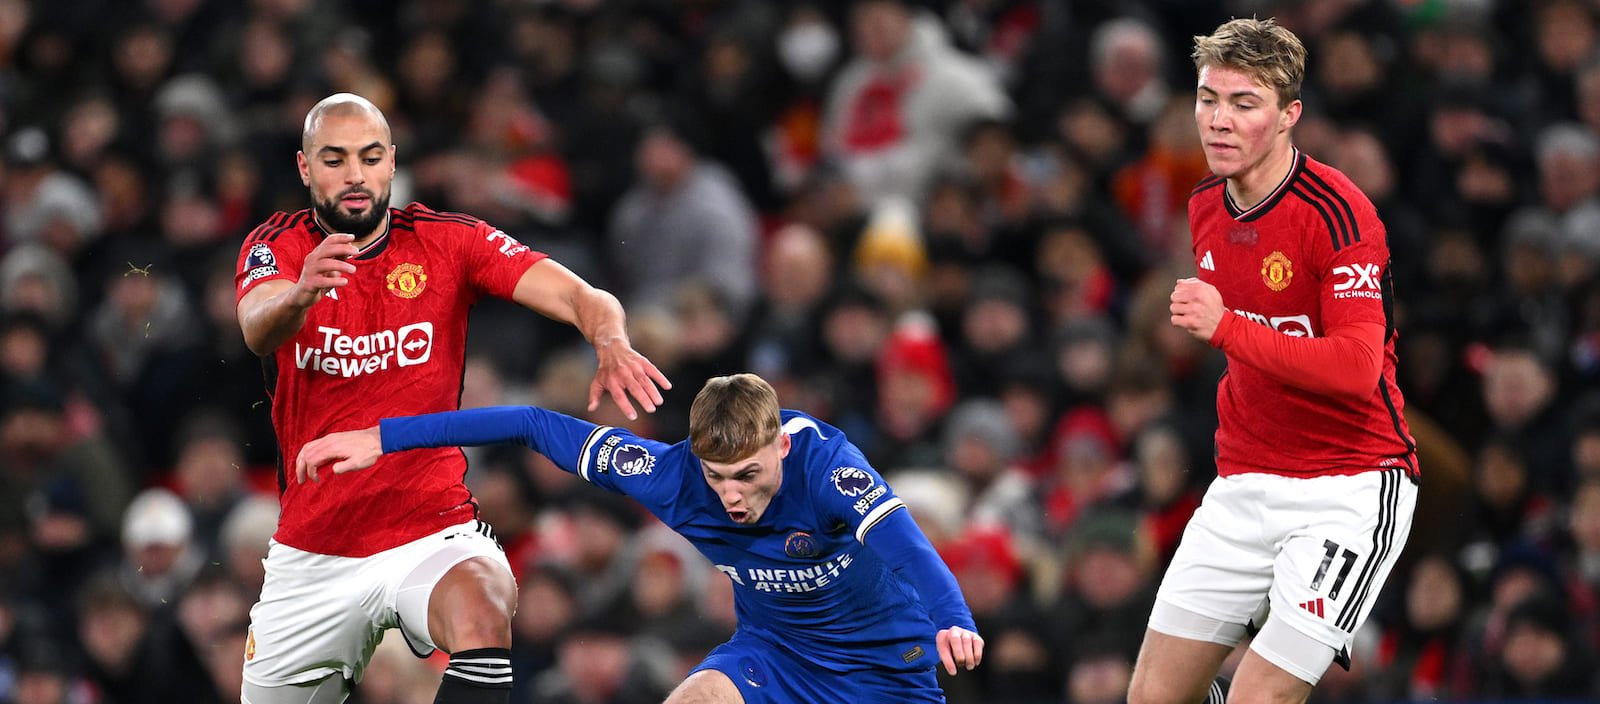 “We’re all behind him”: Sofyan Amrabat reveals Man United squad’s stance on Erik ten Hag after win vs. Chelsea – Man United News And Transfer News